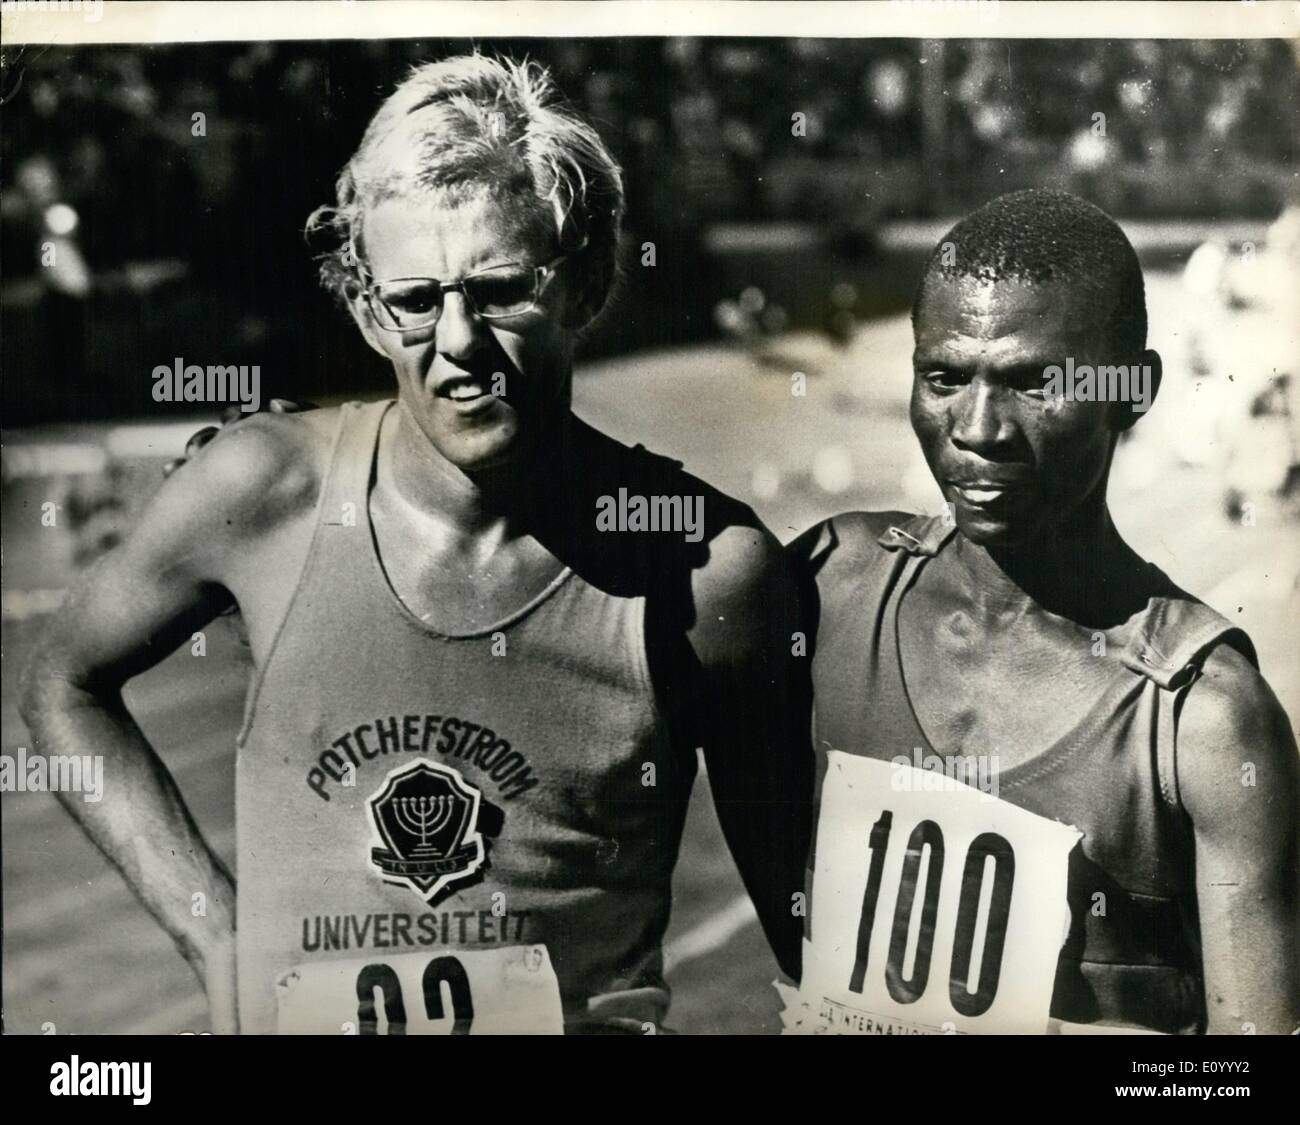 Dec. 12, 1971 - Black and White Athletes in South Africa's first Multi-National Athletics meeting: Pictured together after the 10,000 metres race, held recently in Cape Town during South Africa's first multi-national athletics meeting are Andries Krogman (left), the winner, and Johannes Metsing who was second - both of South Africa. Stock Photo